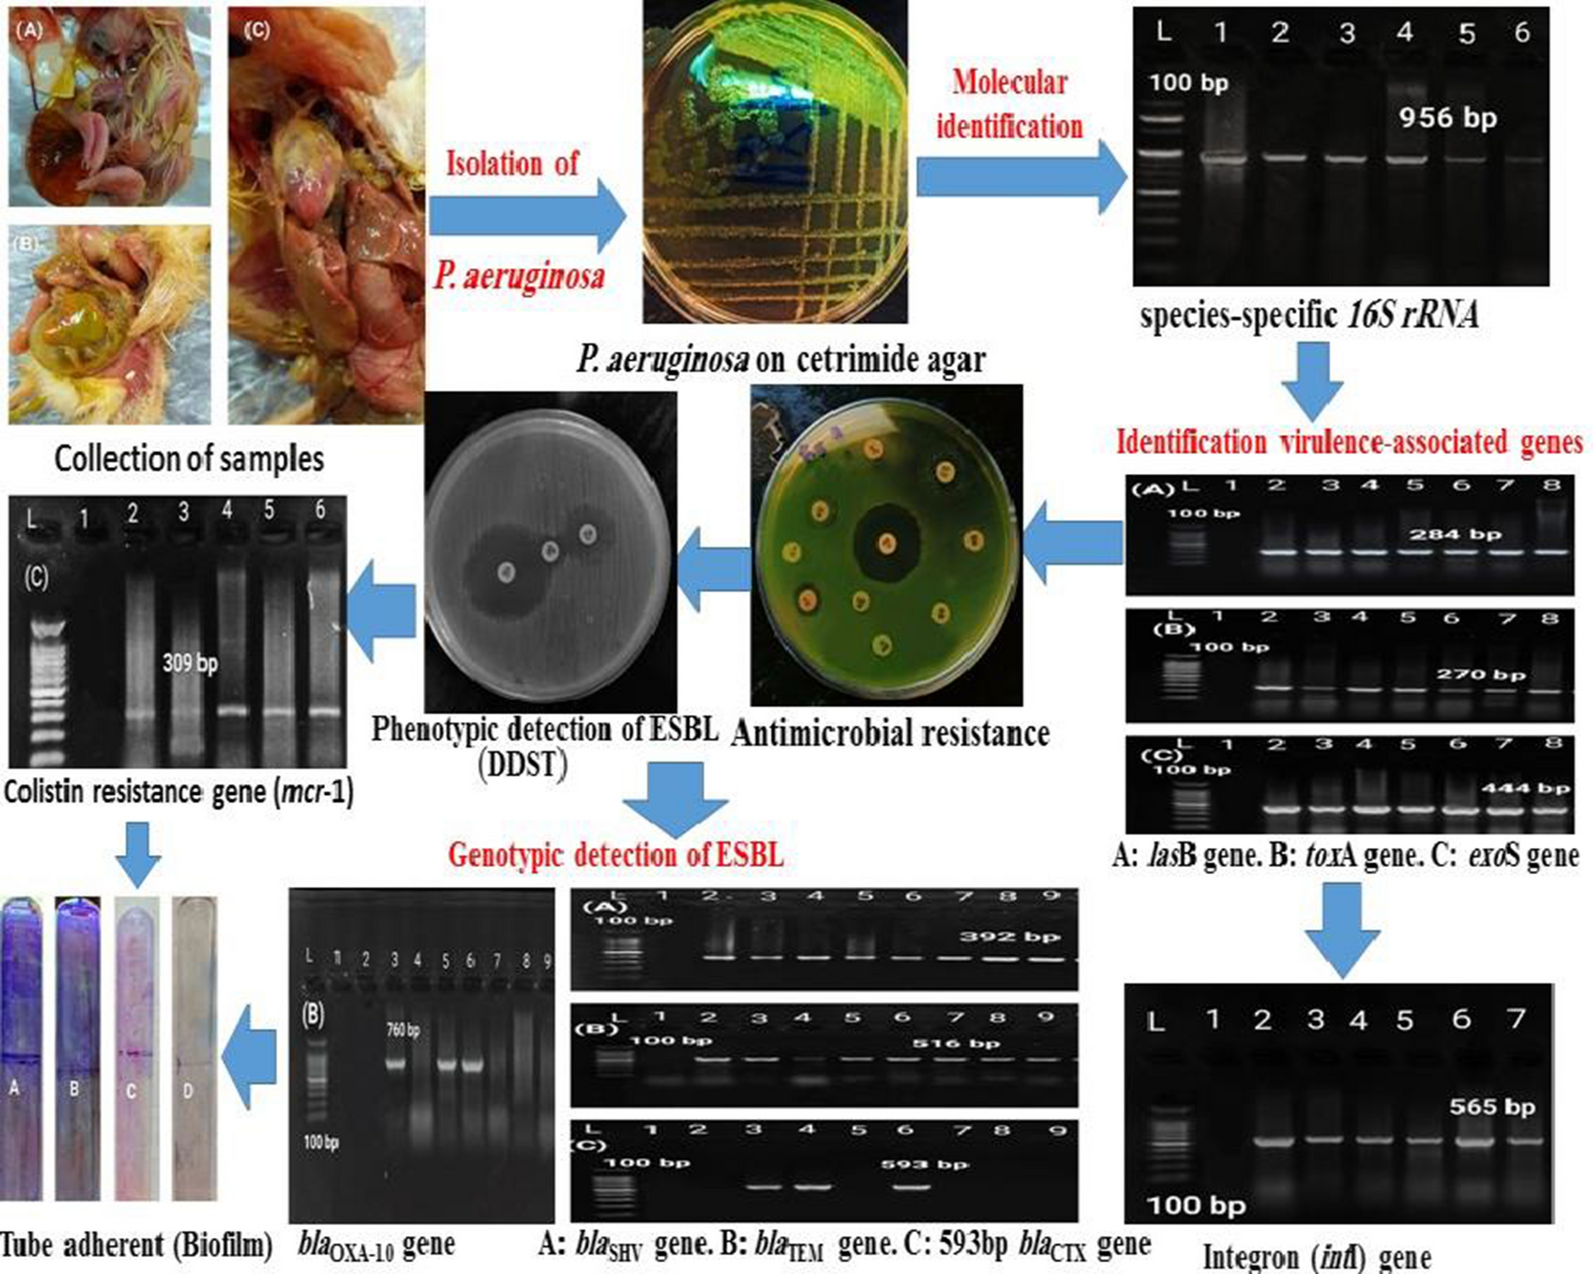 Dissemination of mcr-1 and β-lactamase genes among Pseudomonas aeruginosa: molecular characterization of MDR strains in broiler chicks and dead-in-shell chicks infections